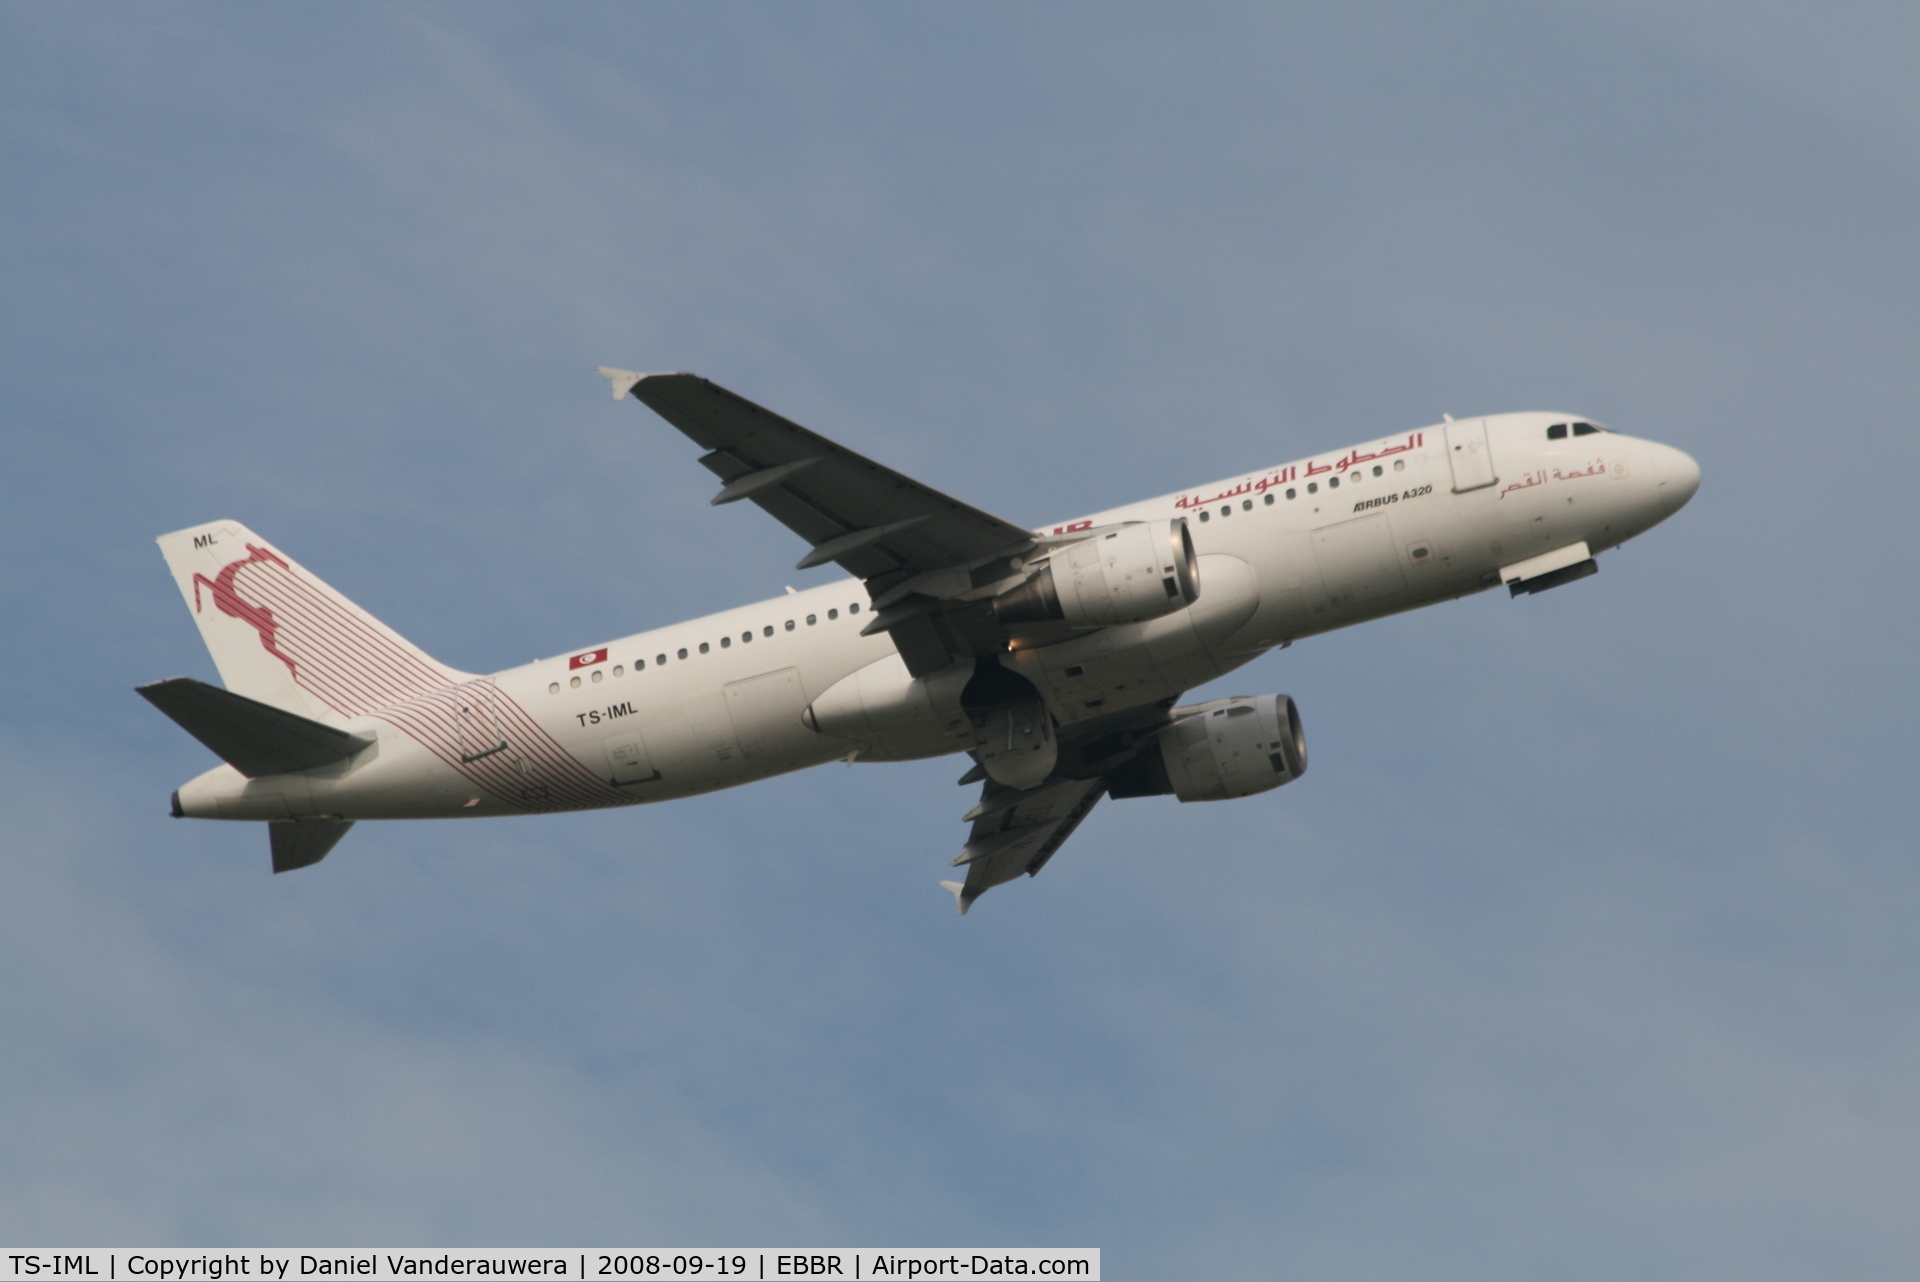 TS-IML, 1999 Airbus A320-211 C/N 0958, Taking off from RWY 07R